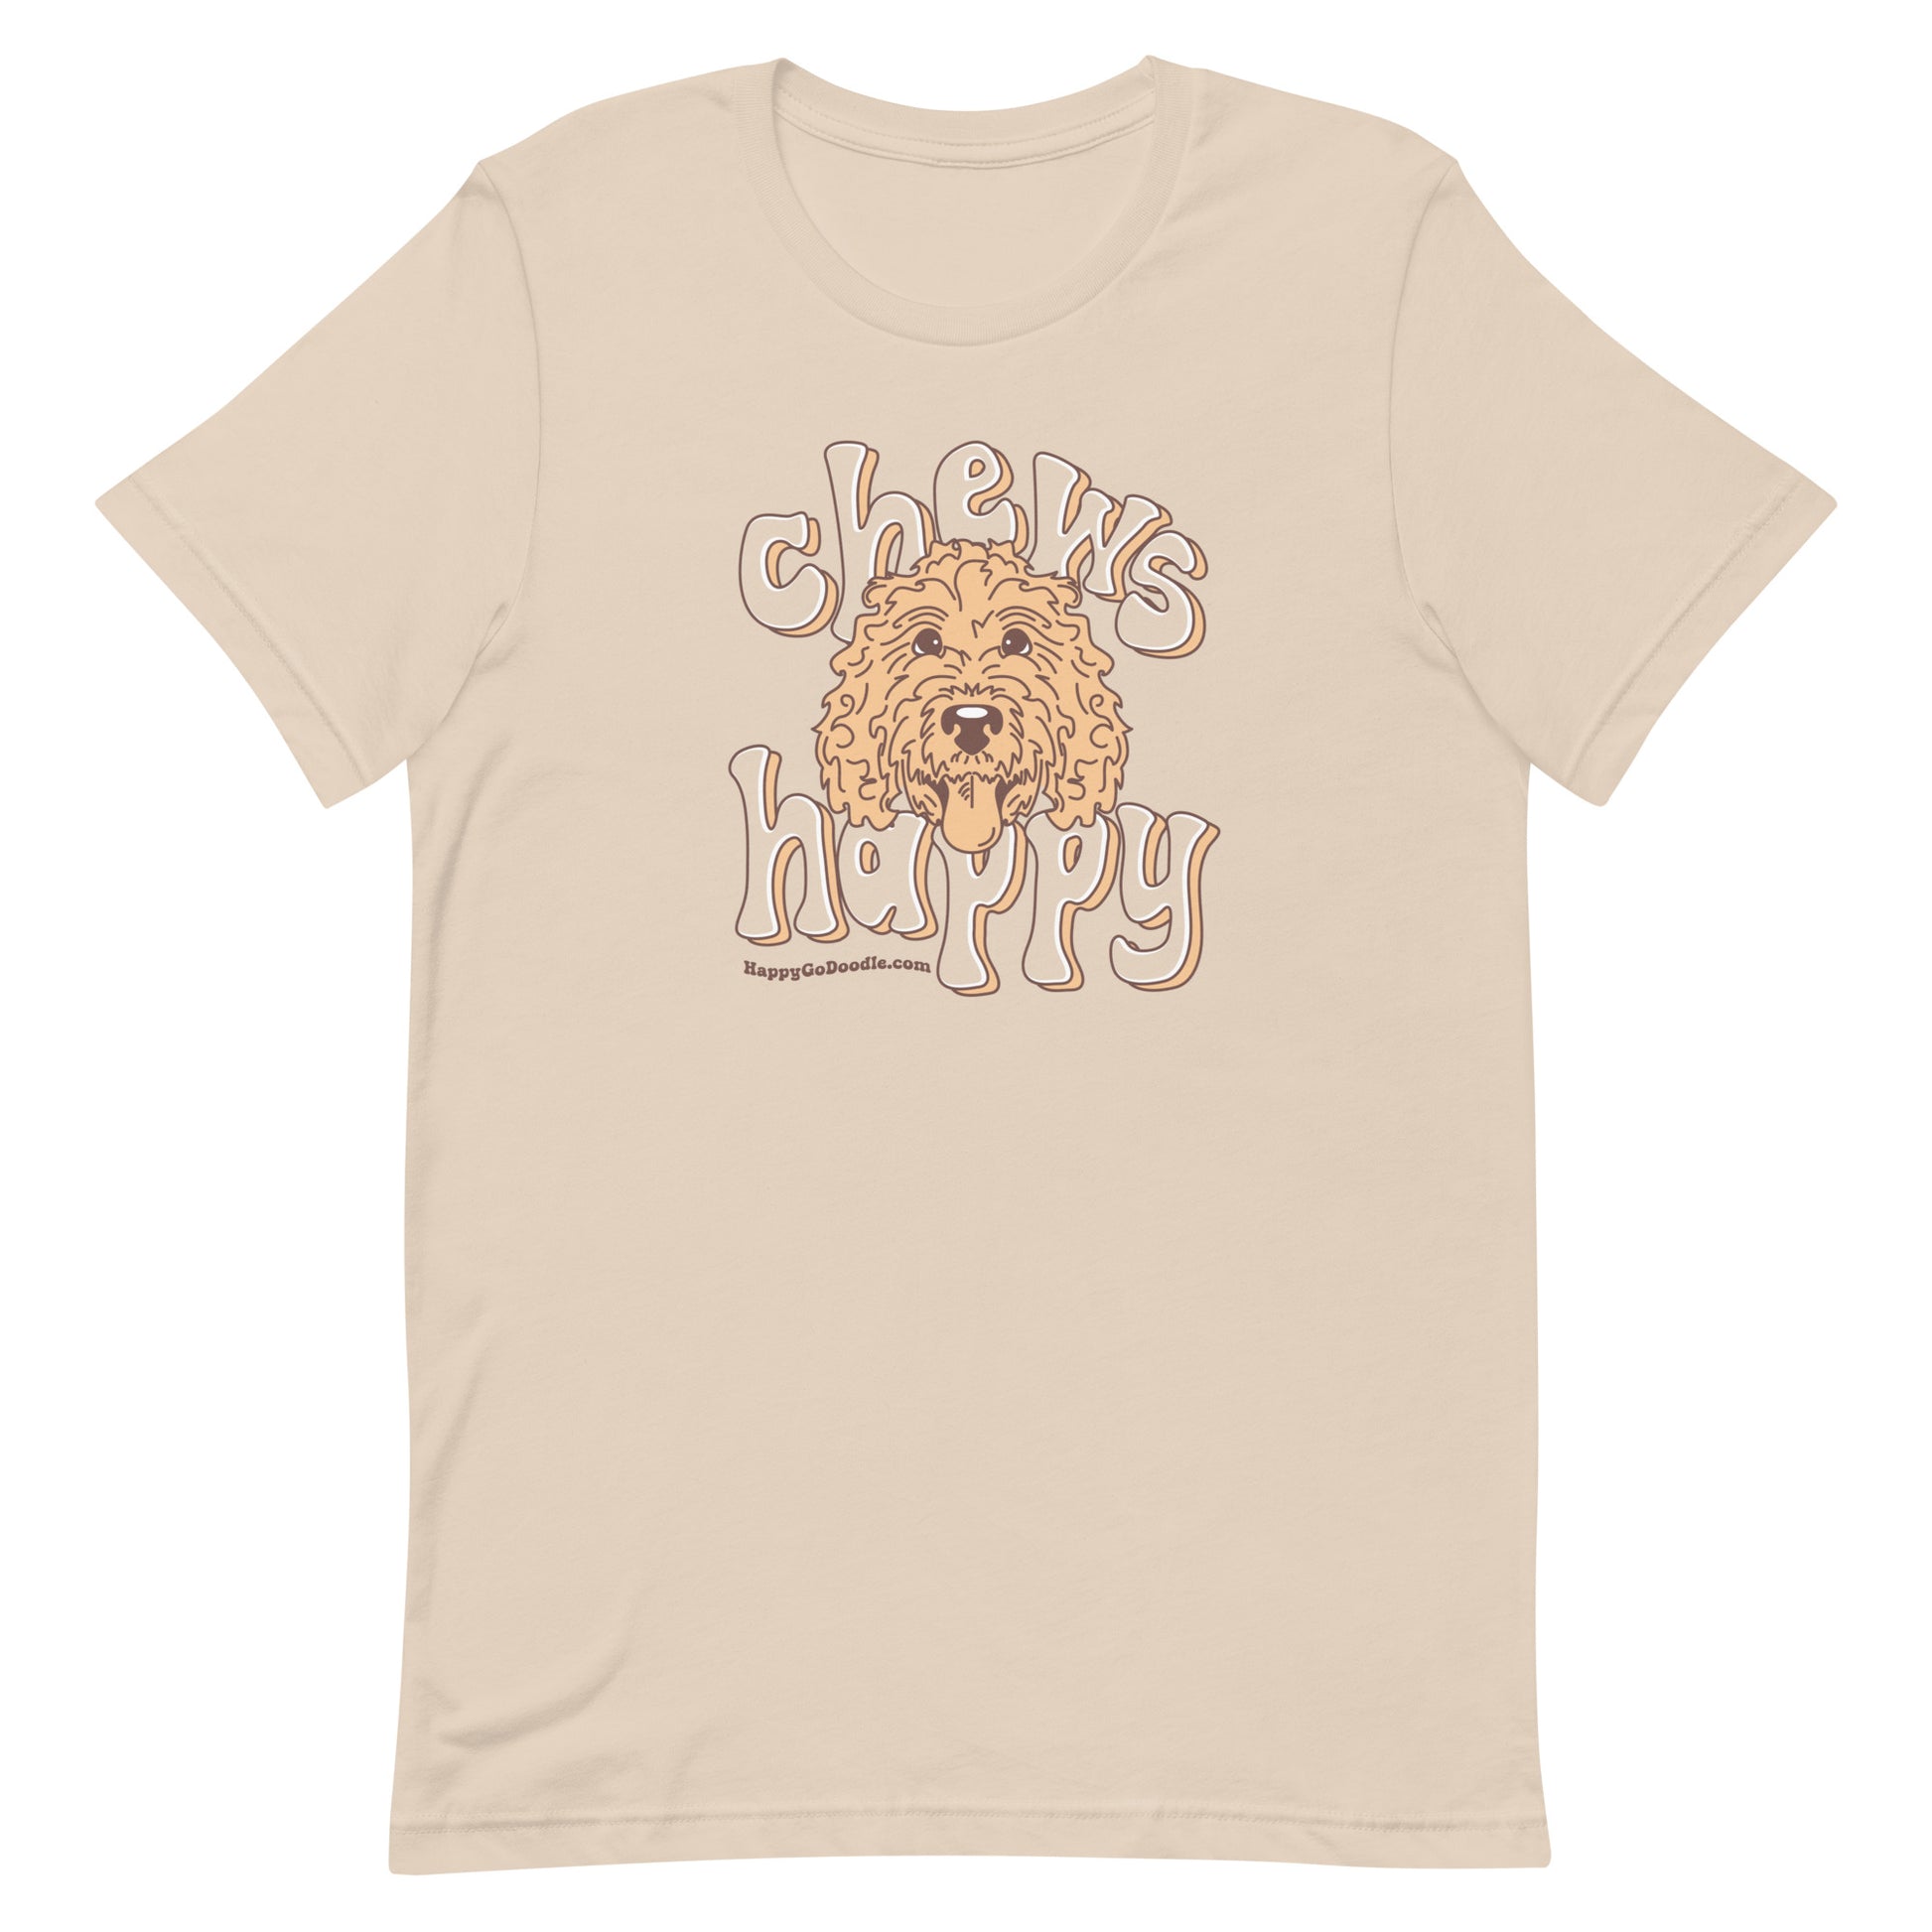 Goldendoodle crew neck sweatshirt with Goldendoodle face and words "Chews Happy" in soft cream color